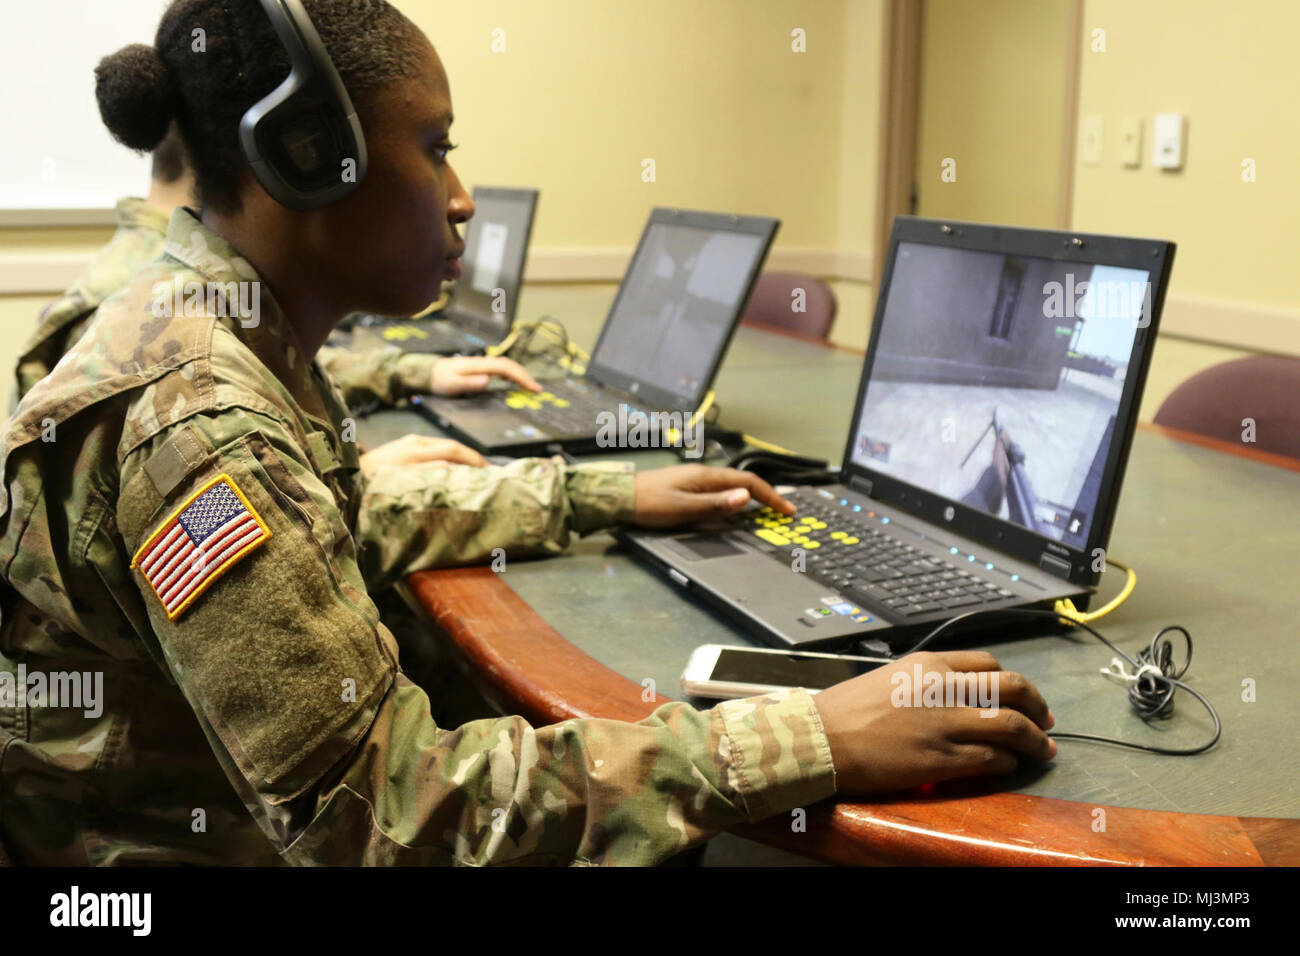 U.S. Army Pfc. Brion M. Eleazer of Lithonia, Ga., a human resources  specialist with the 642nd Regional Support Group, takes part in virtual  convoy training Feb. 24, at the unit headquarters in